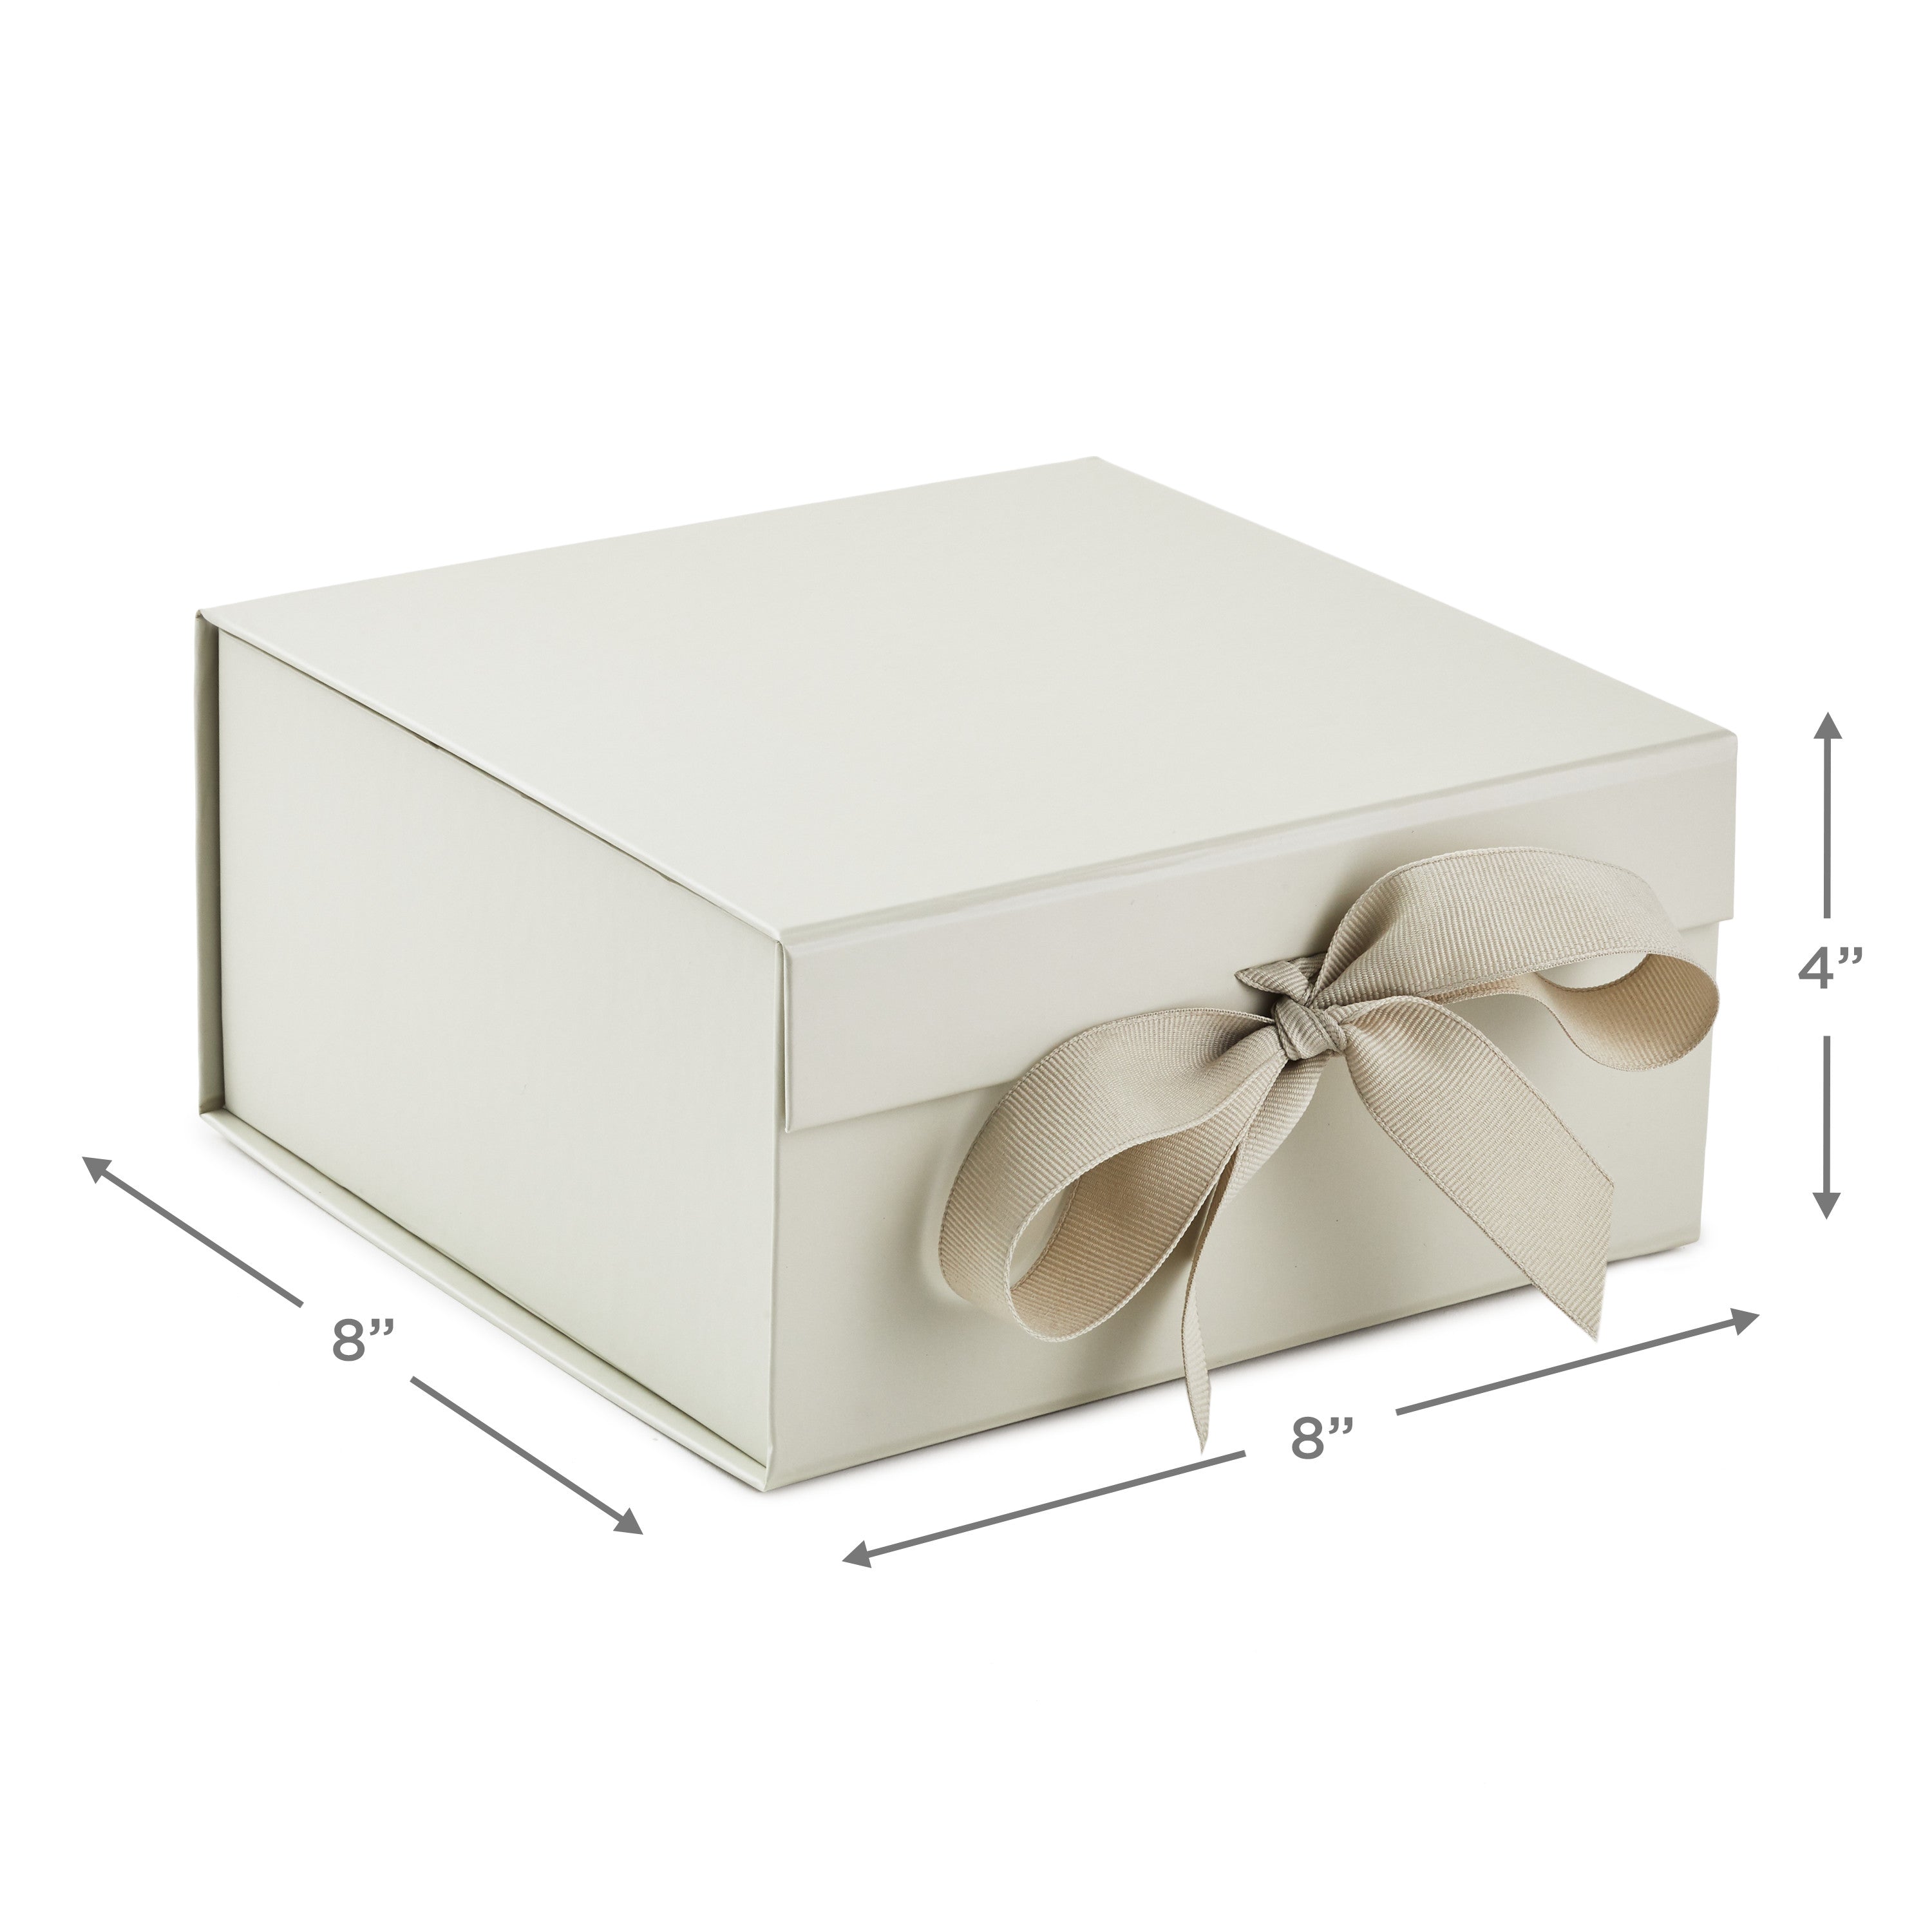 Hallmark Foldable Gift Box Bundle (2 Matching Boxes with Ribbon: Pearl White) for Weddings, Bridesmaids Gifts, Bridal Showers, Graduations